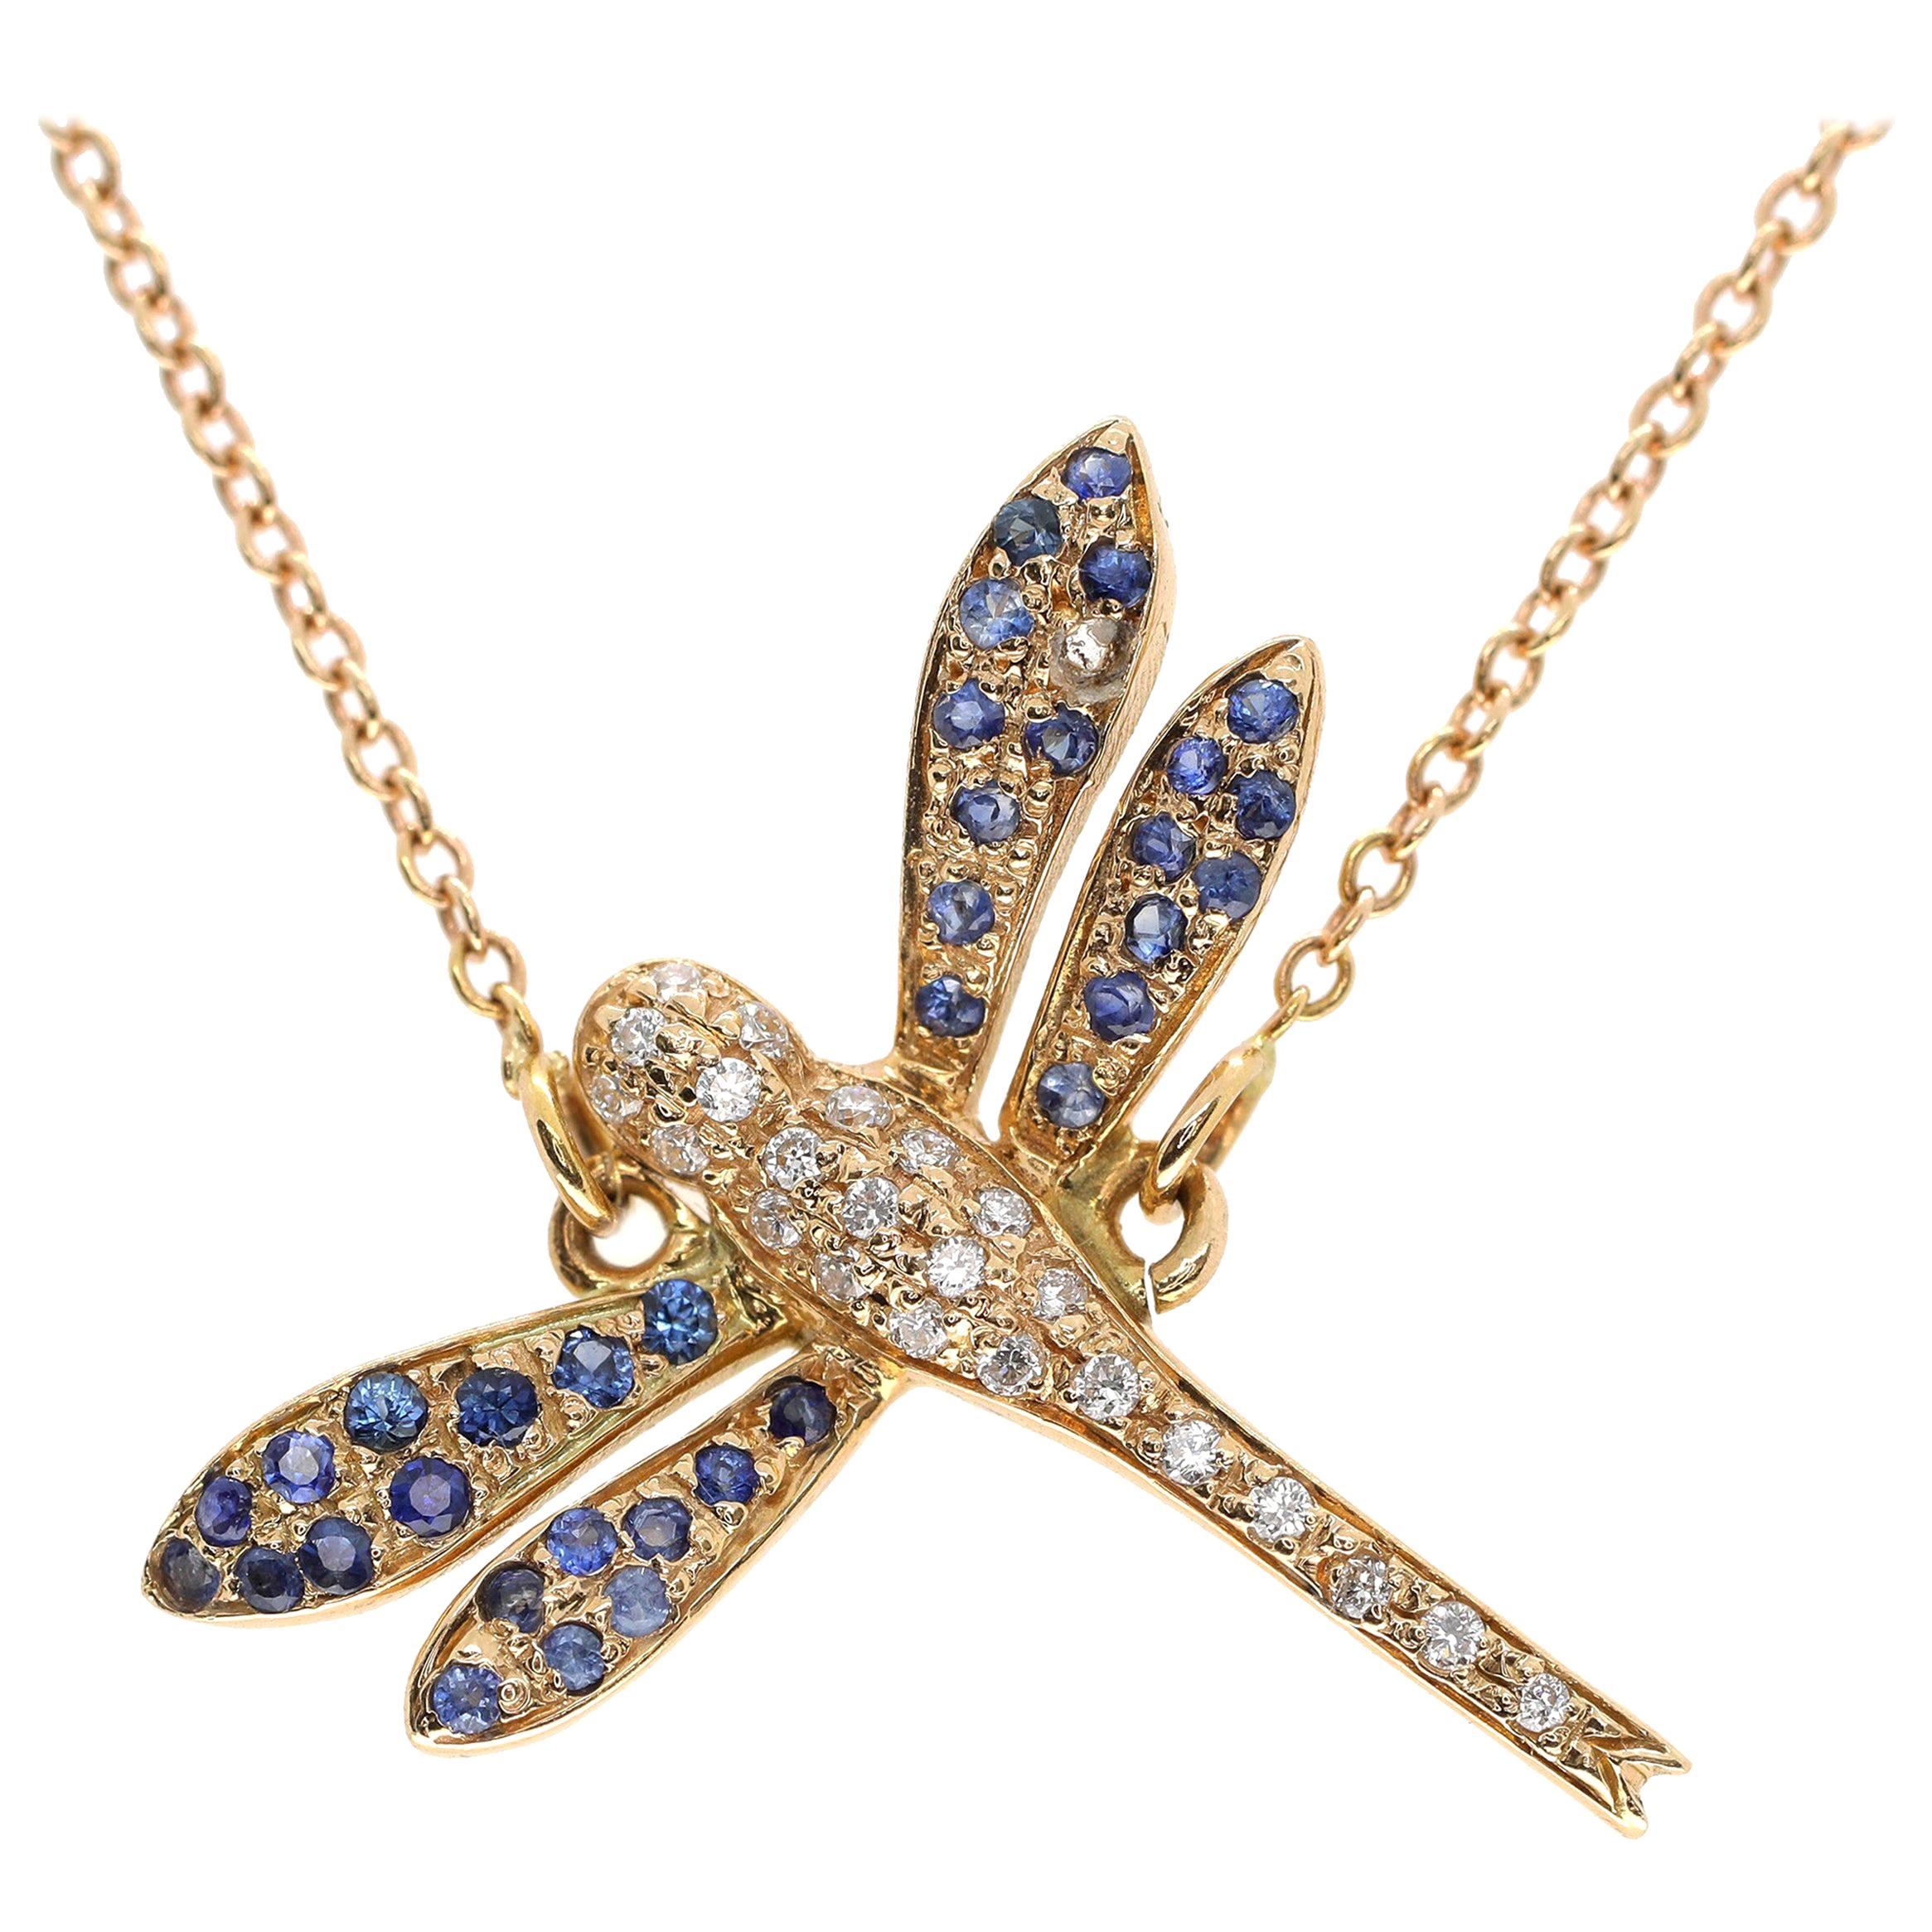 A delicate bracelet in 18-karat rose gold with a single dragonfly set with white diamonds and blue sapphires. The bracelet is 18 centimetres long and weighs 2 grams.

Are you looking for a set? Our pieces look great worn together. Send us a message